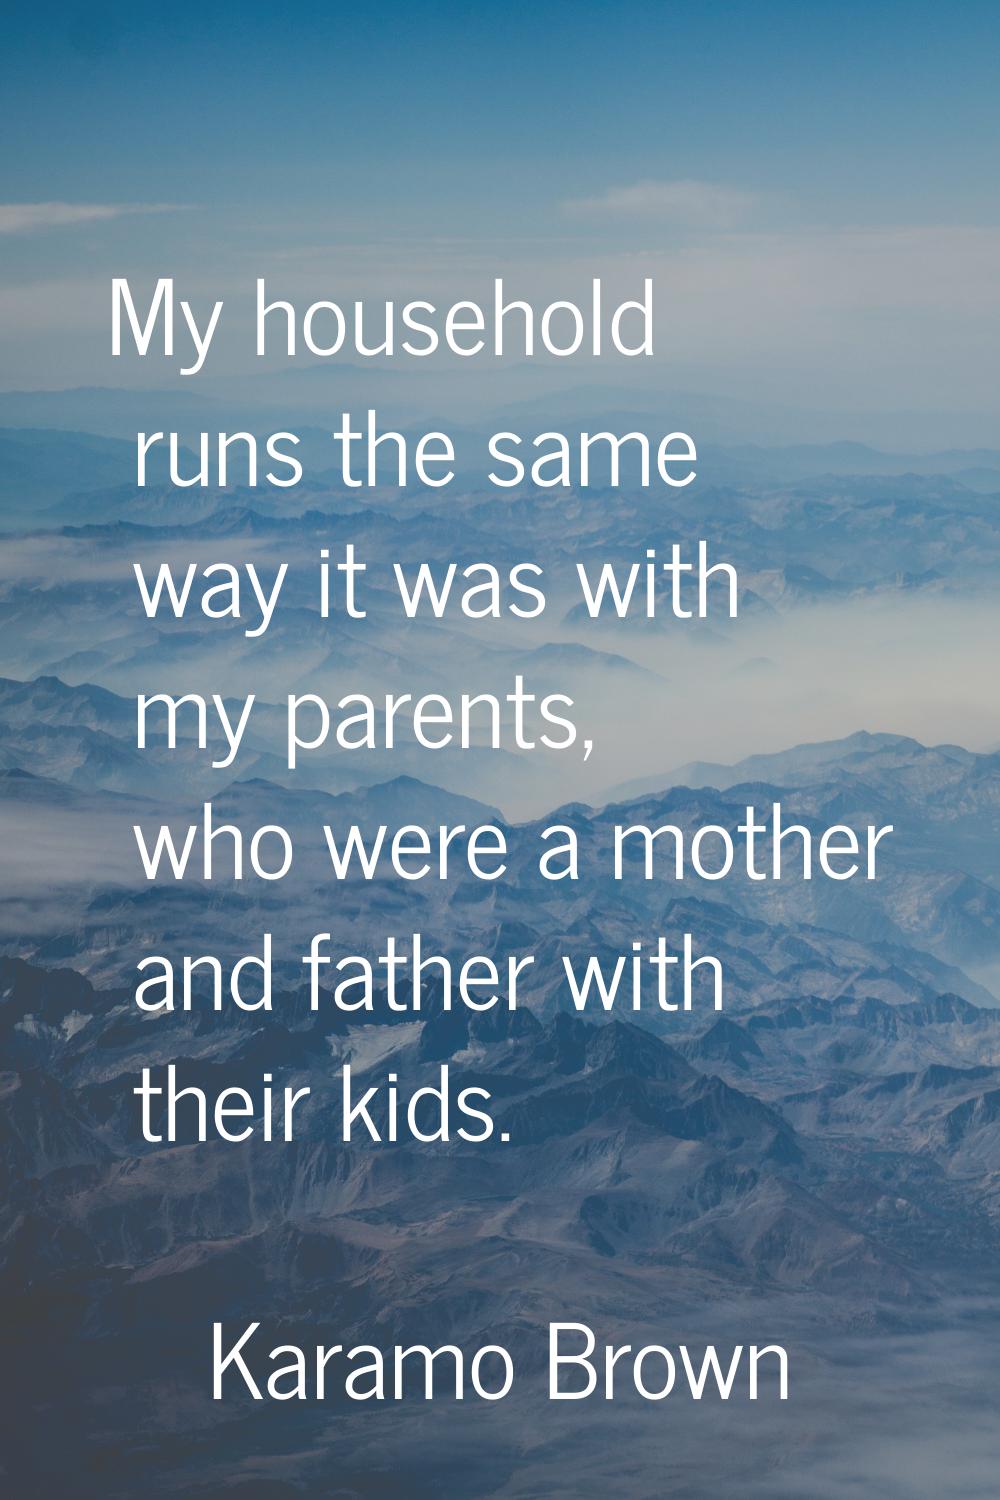 My household runs the same way it was with my parents, who were a mother and father with their kids